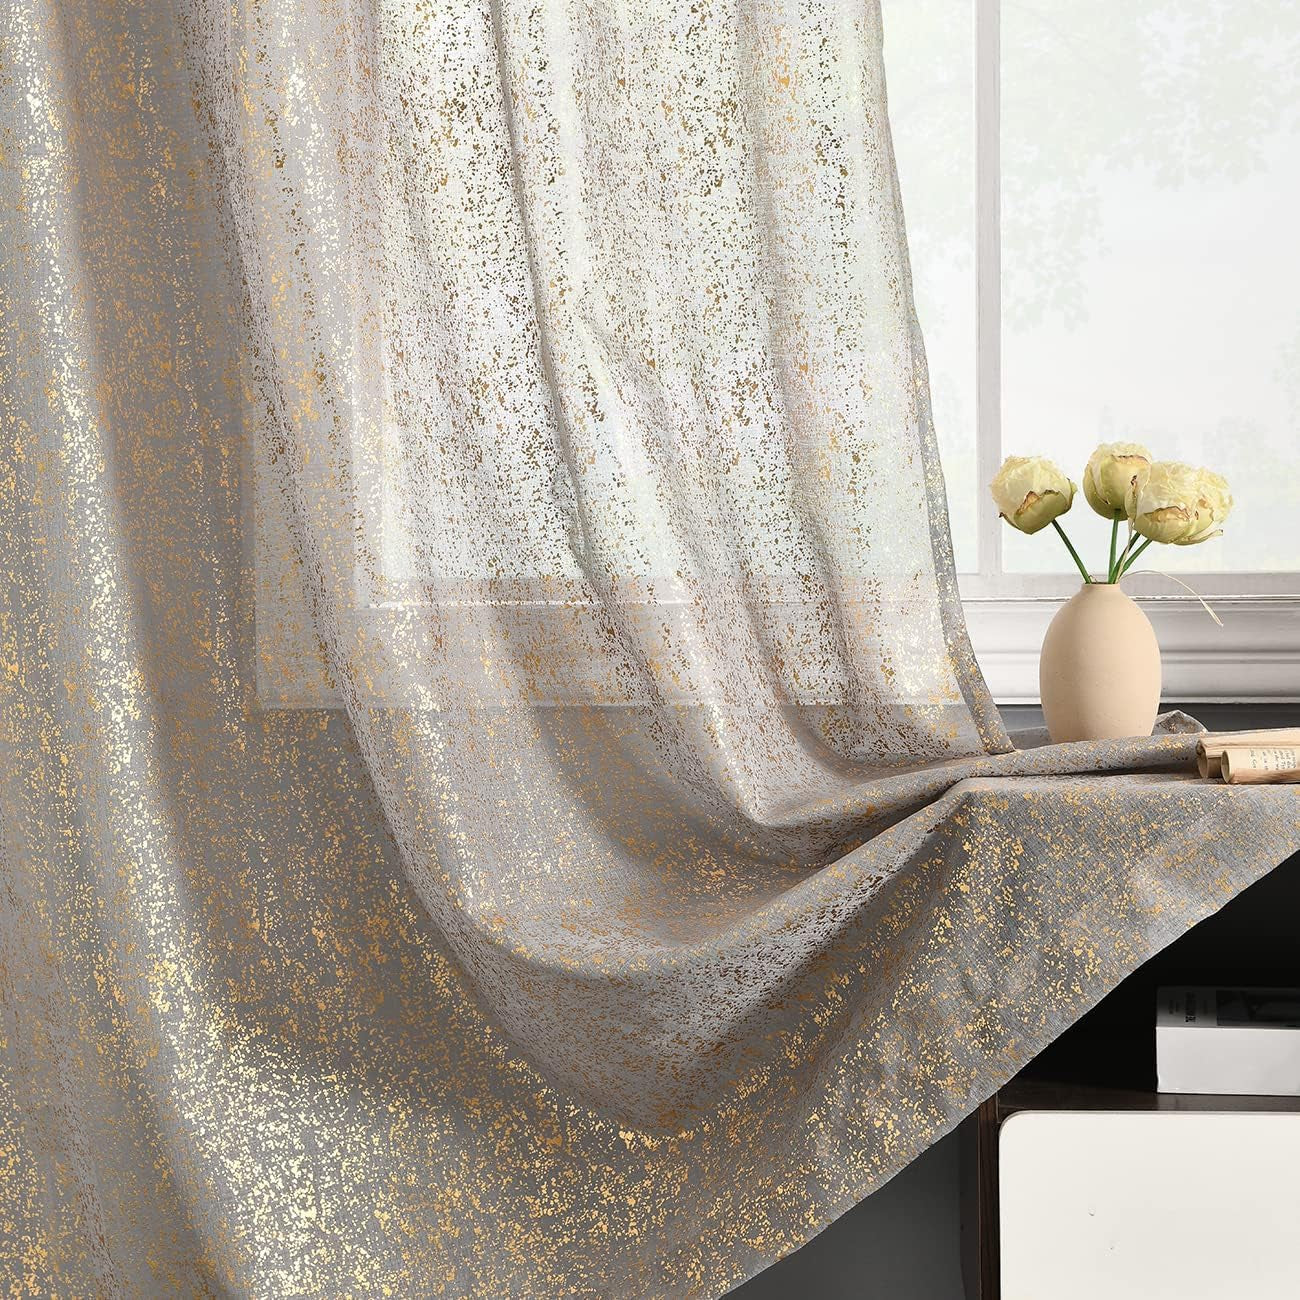 TERLYTEX Black and Silver Curtains 72 Inch Length - Metallic Silver Foil Spray Dots Glitter Sheer Curtains for Living Room, Privacy Sparkle Curtains for Windows, 52 X 72 Inch, 2 Panels, Black Silver  TERLYTEX Gold Grey W52 X L45 Inch|Pair 